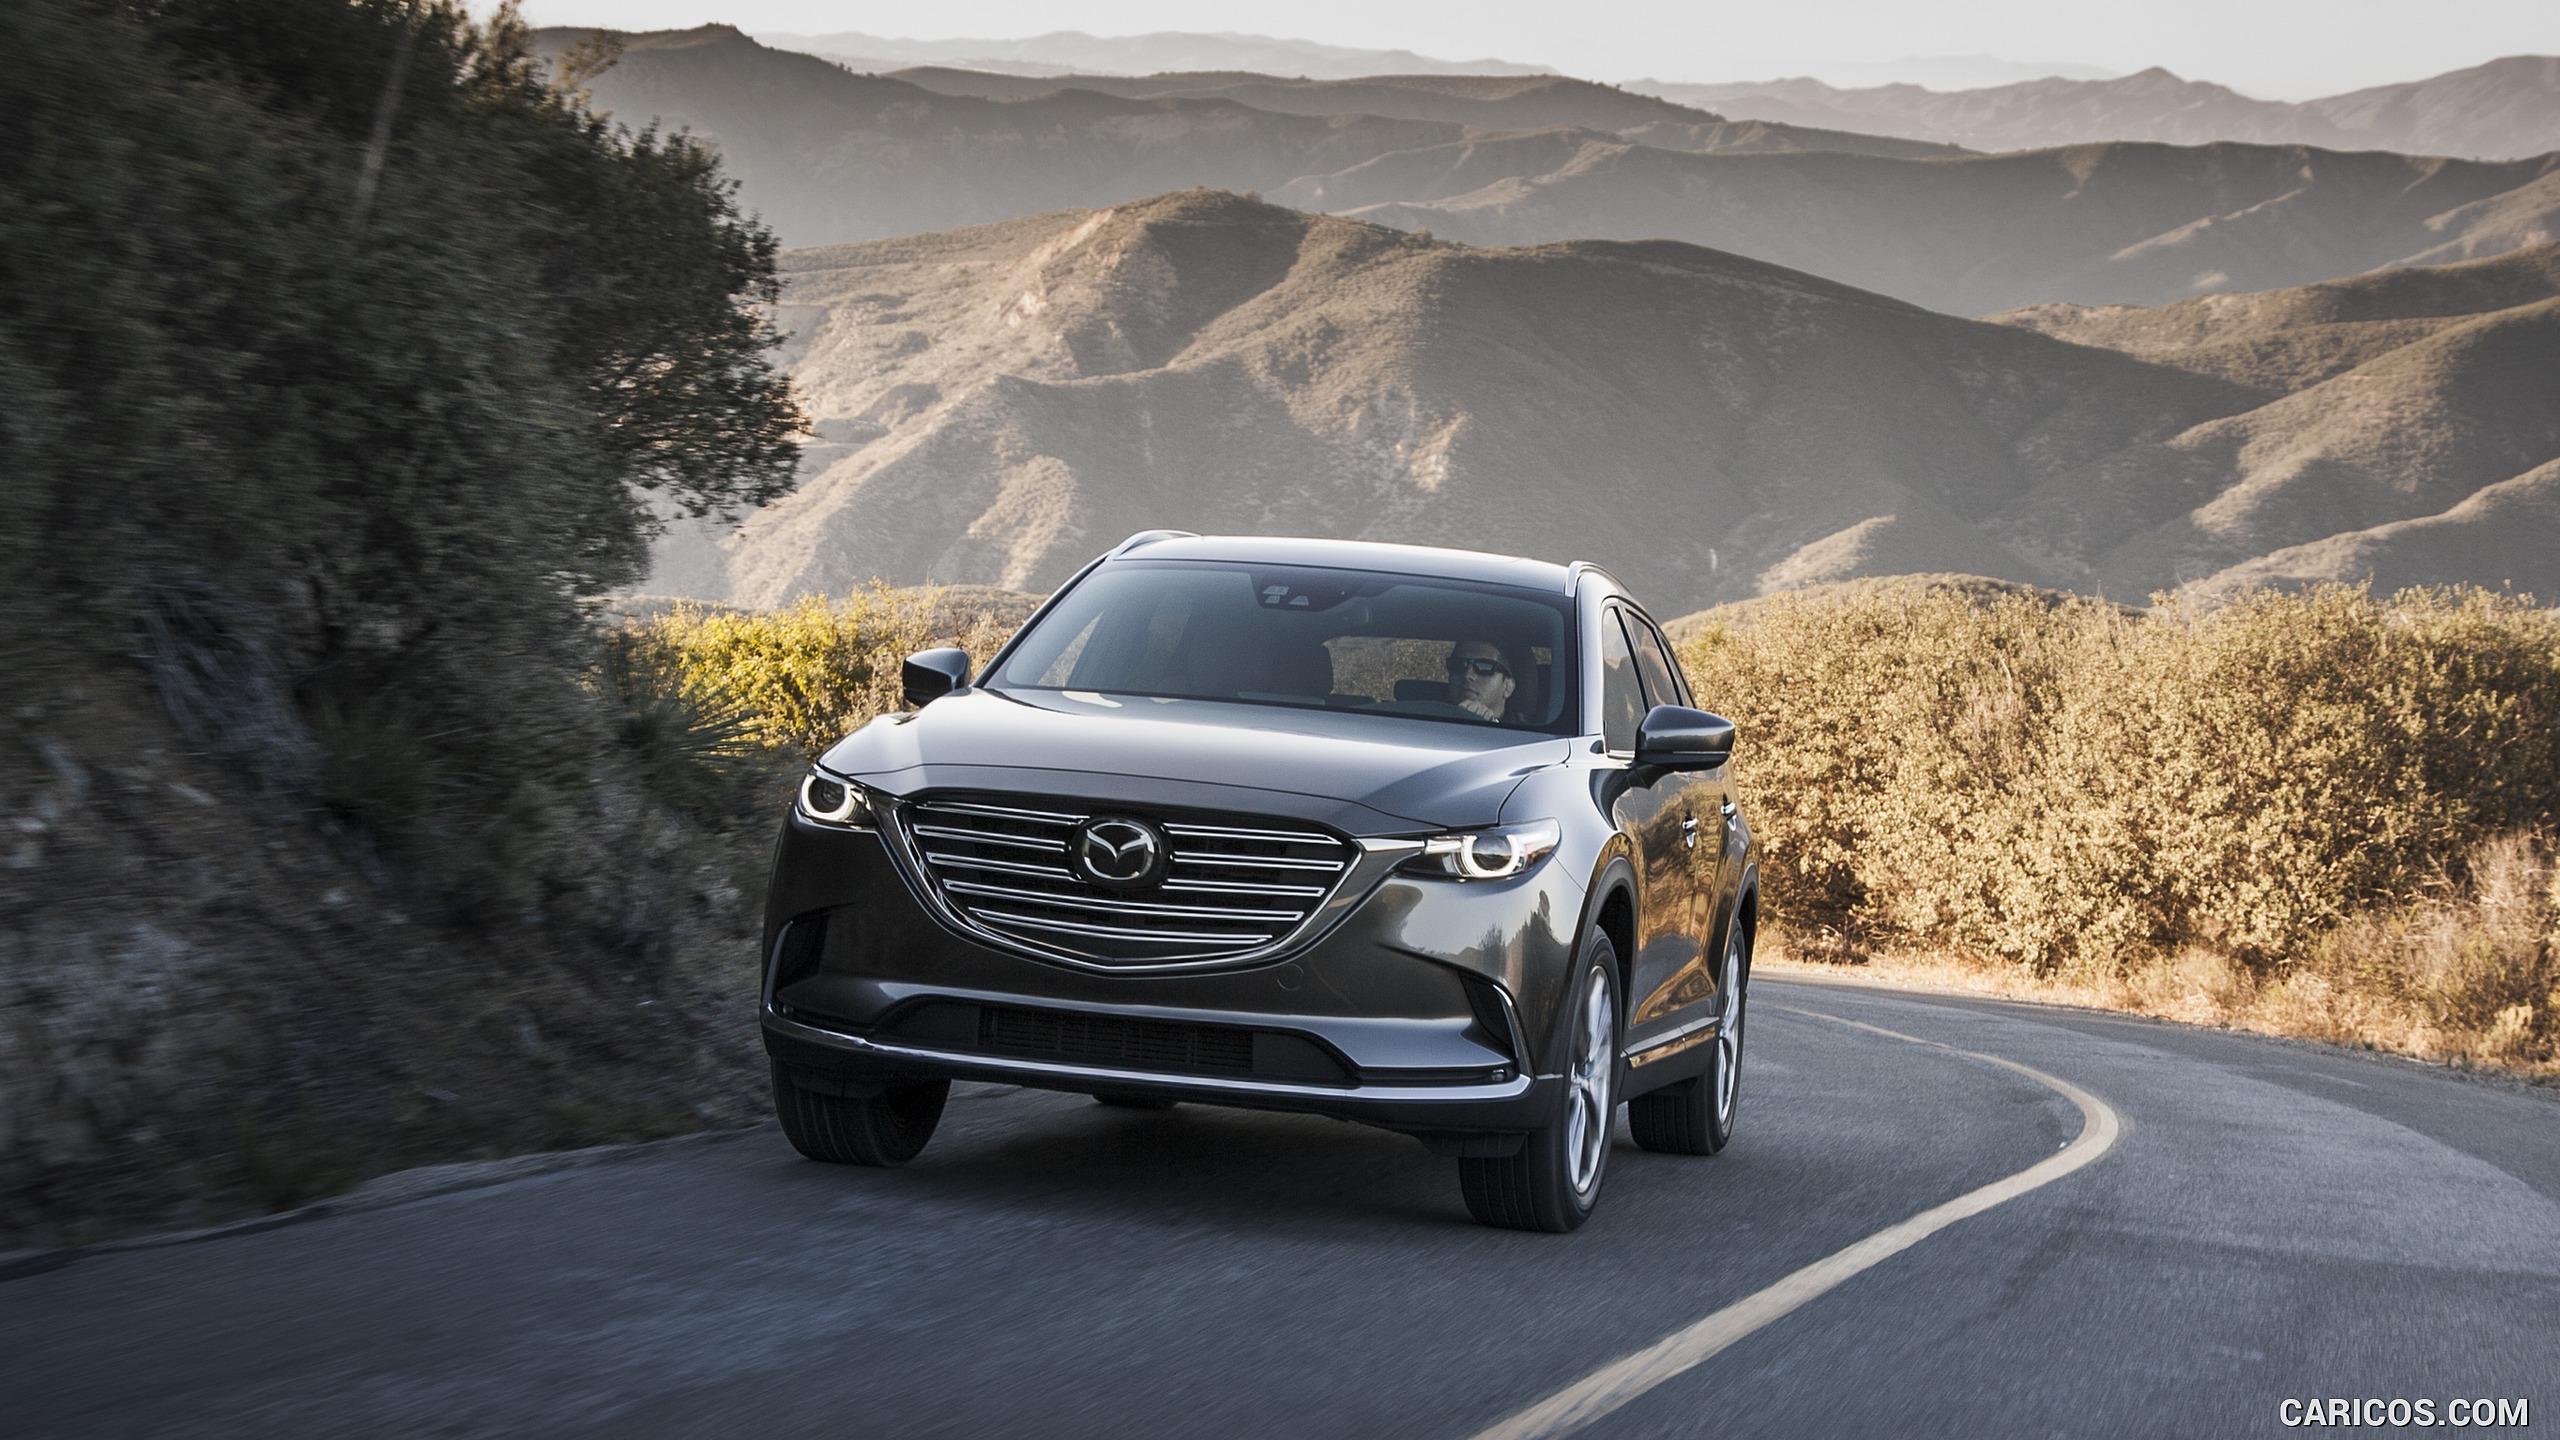 2016 Mazda CX-9 - Front, #4 of 69